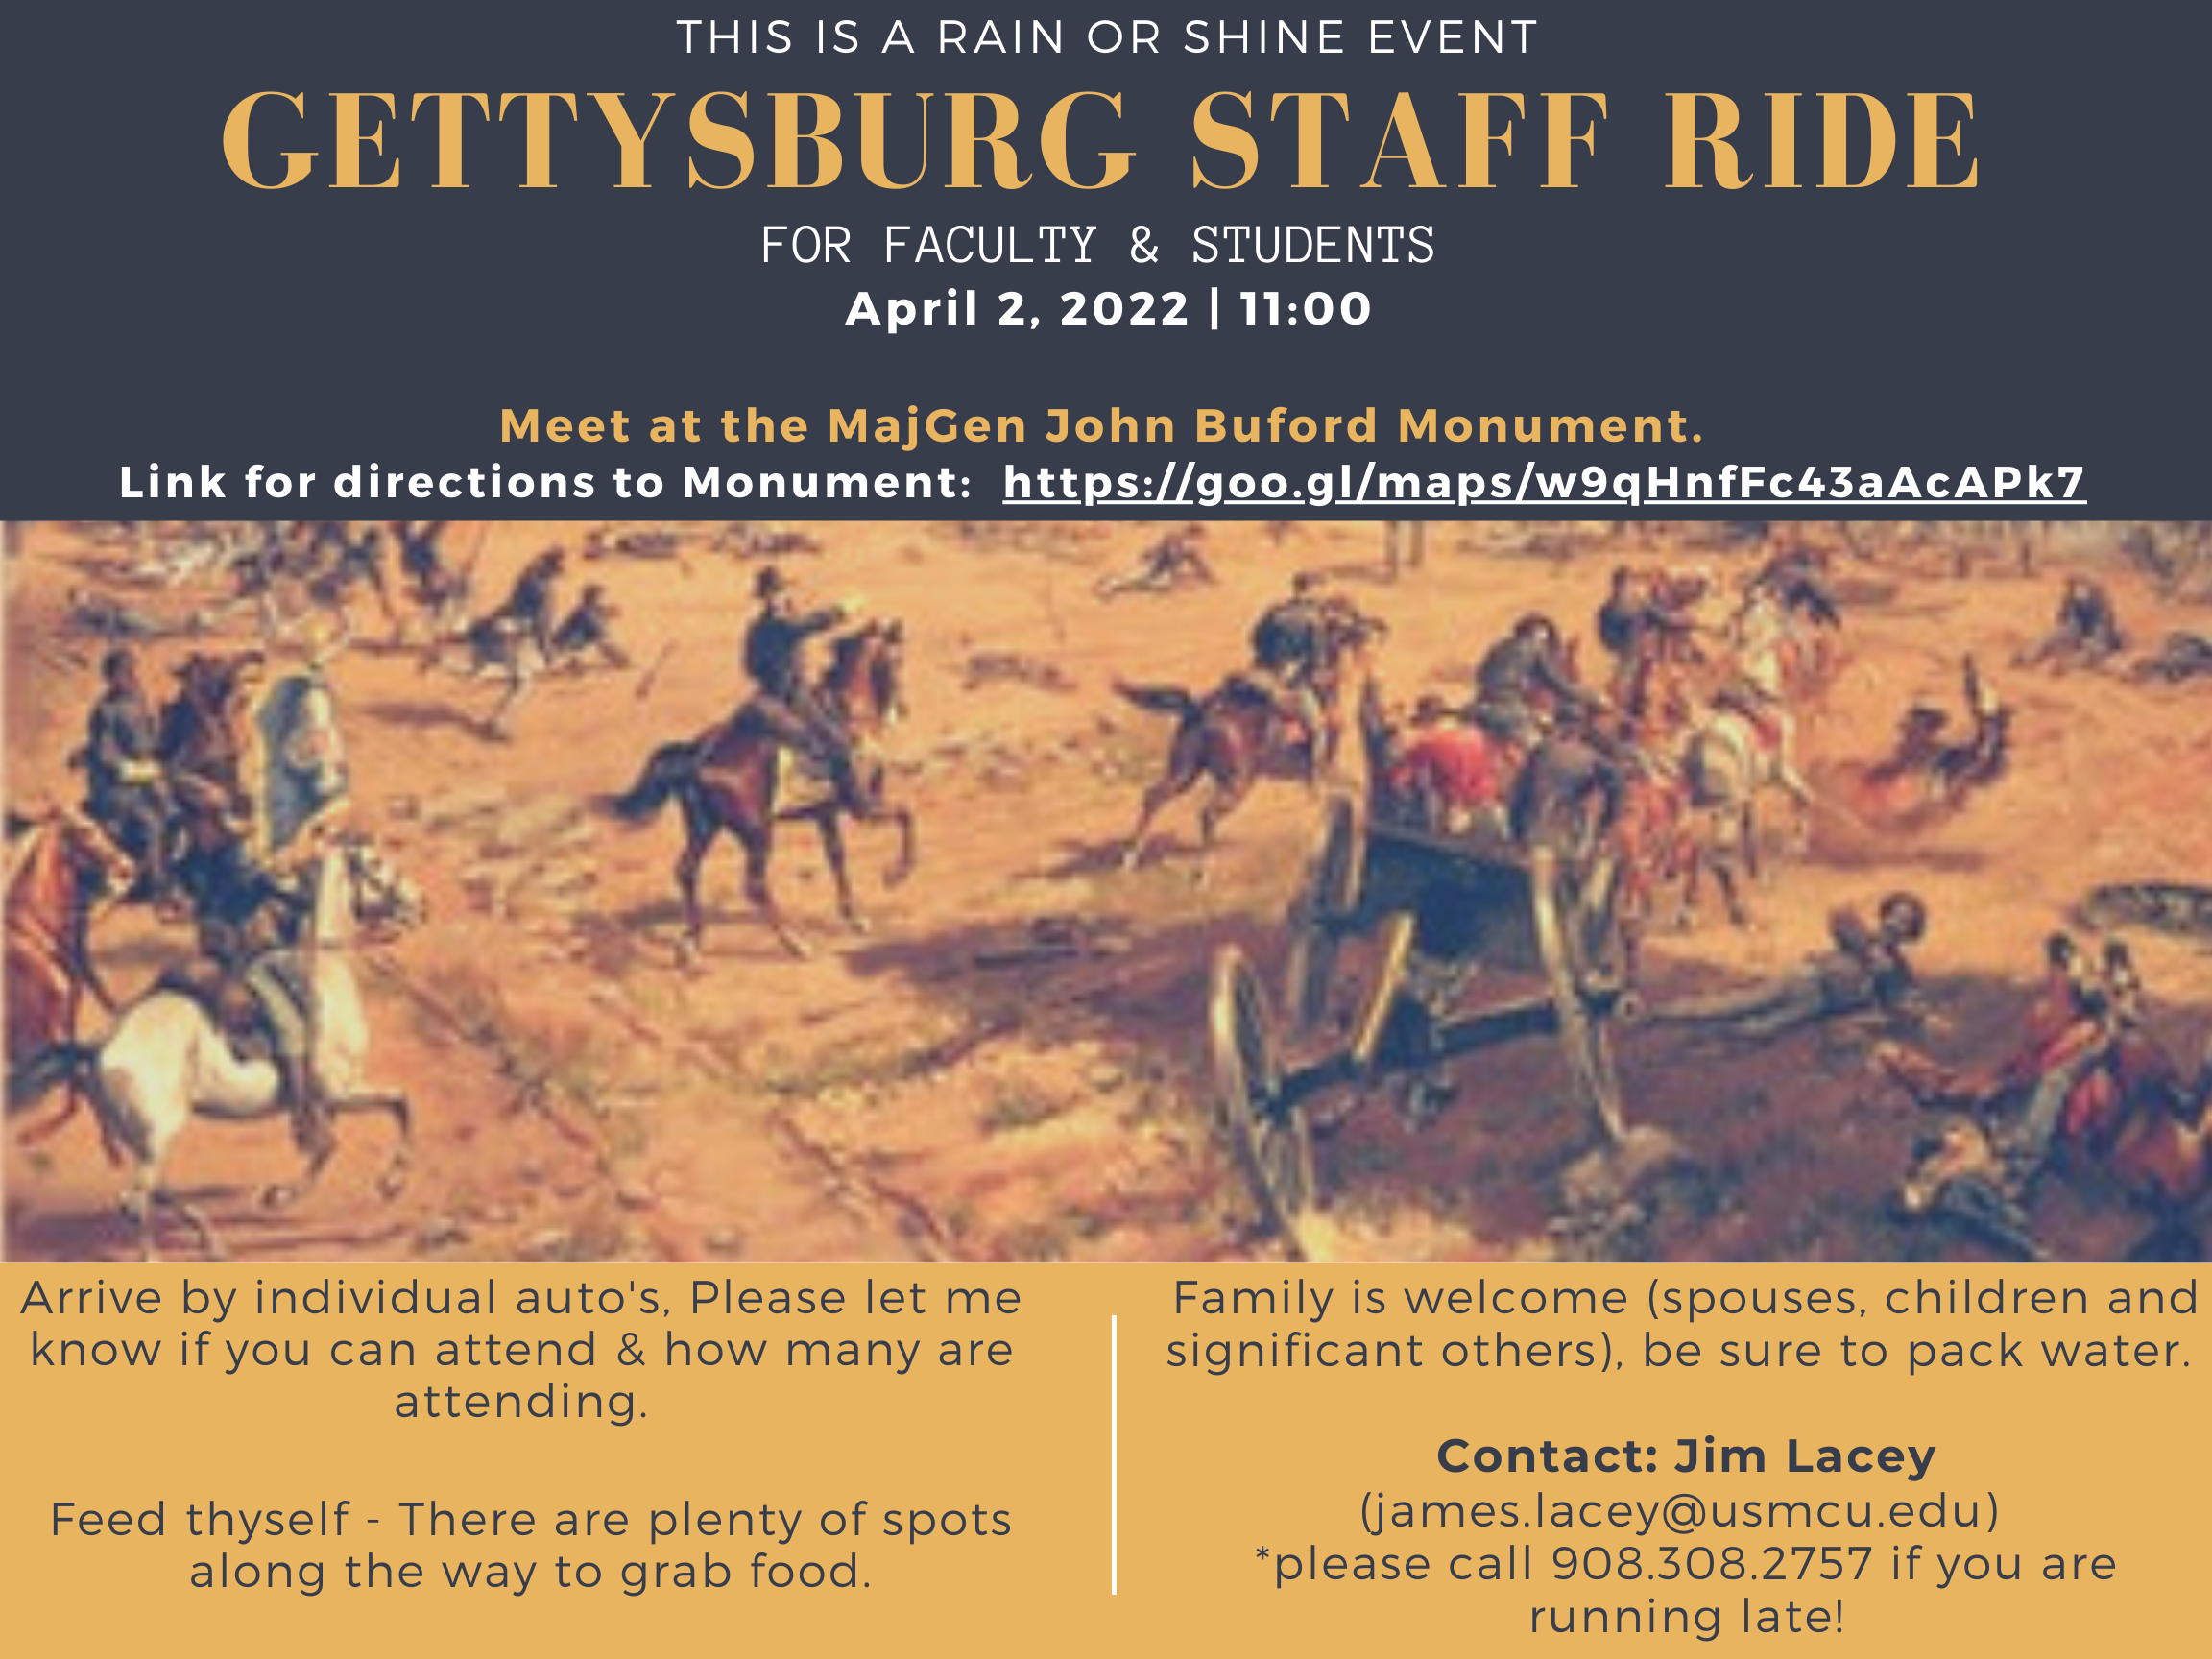 MCU Student Staff ride to Gettysburg with Dr. Jim Lacey 2 April, 2022